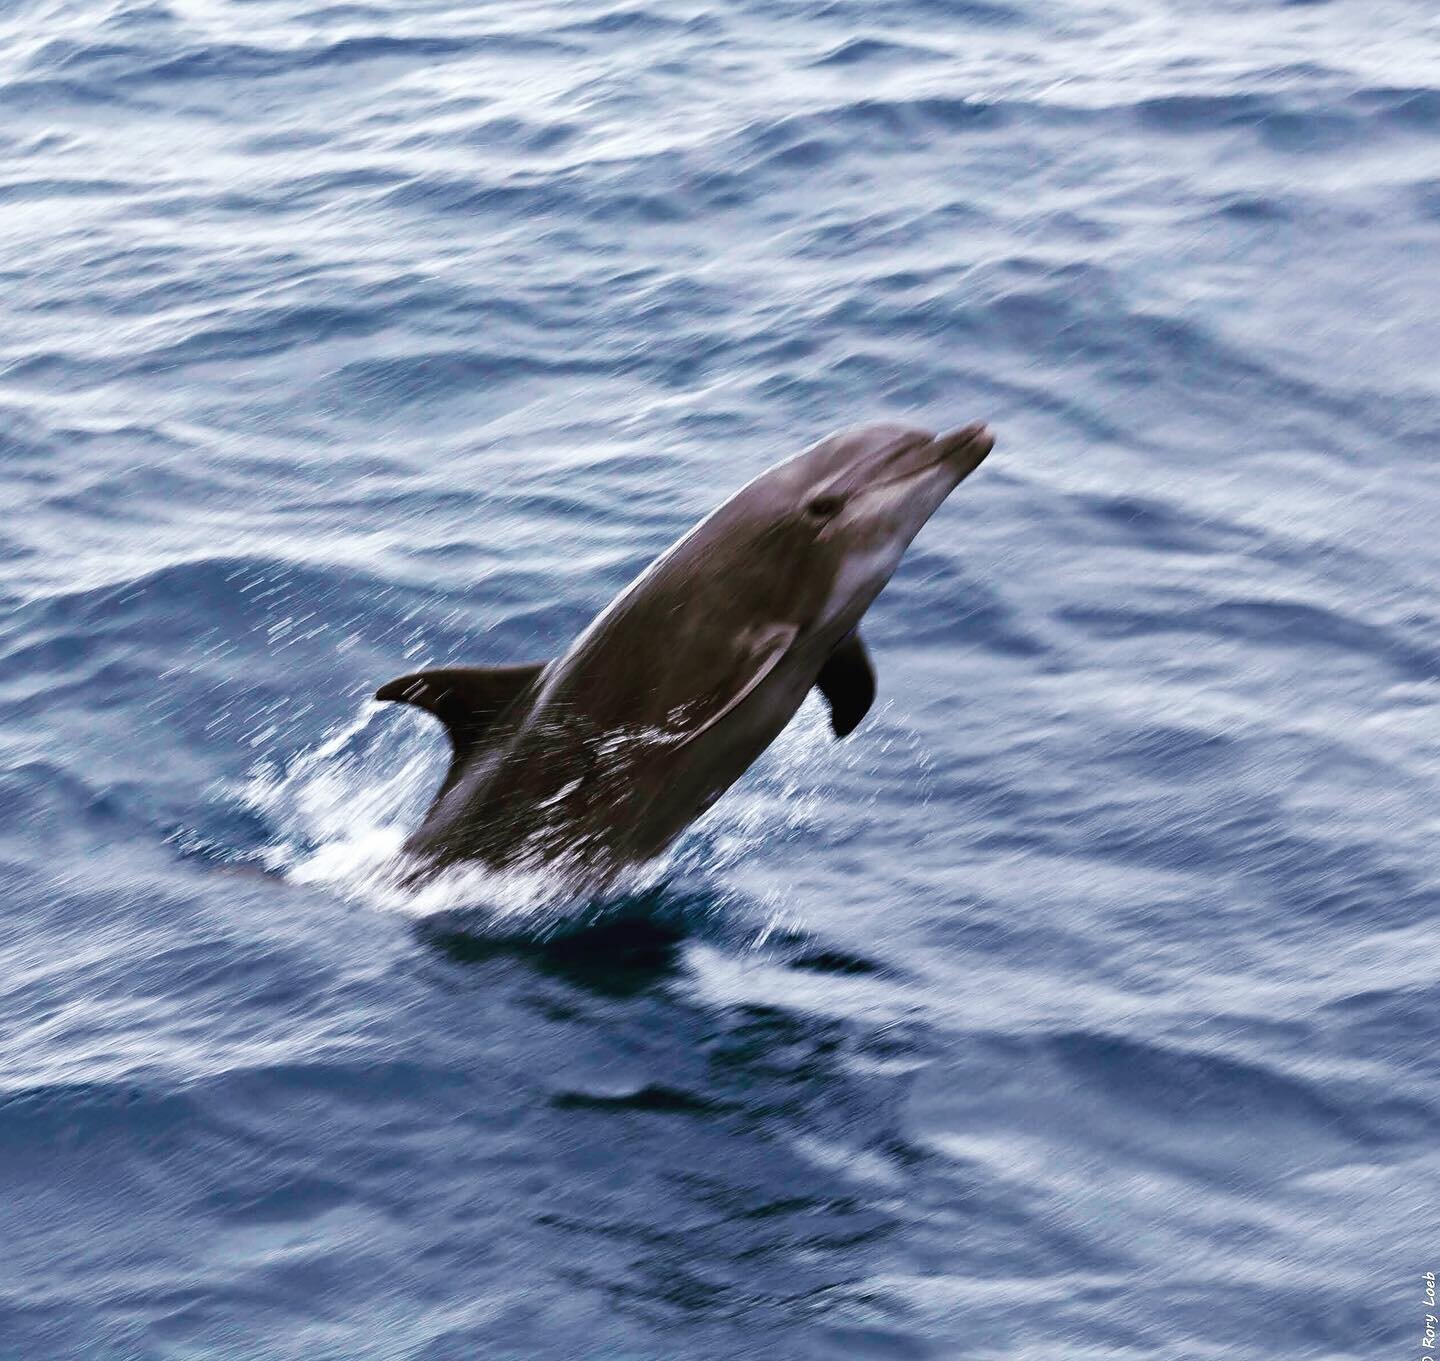 Dolphins are frequently seen on Galapagos journeys, sometimes solo, often times in large pods.  They&rsquo;re playful and enjoy delighting guests on deck. 
#galapagos #wildlife #marinelife #integritygalapagos #luxurycruise 

Photo courtesy of INTEGRI